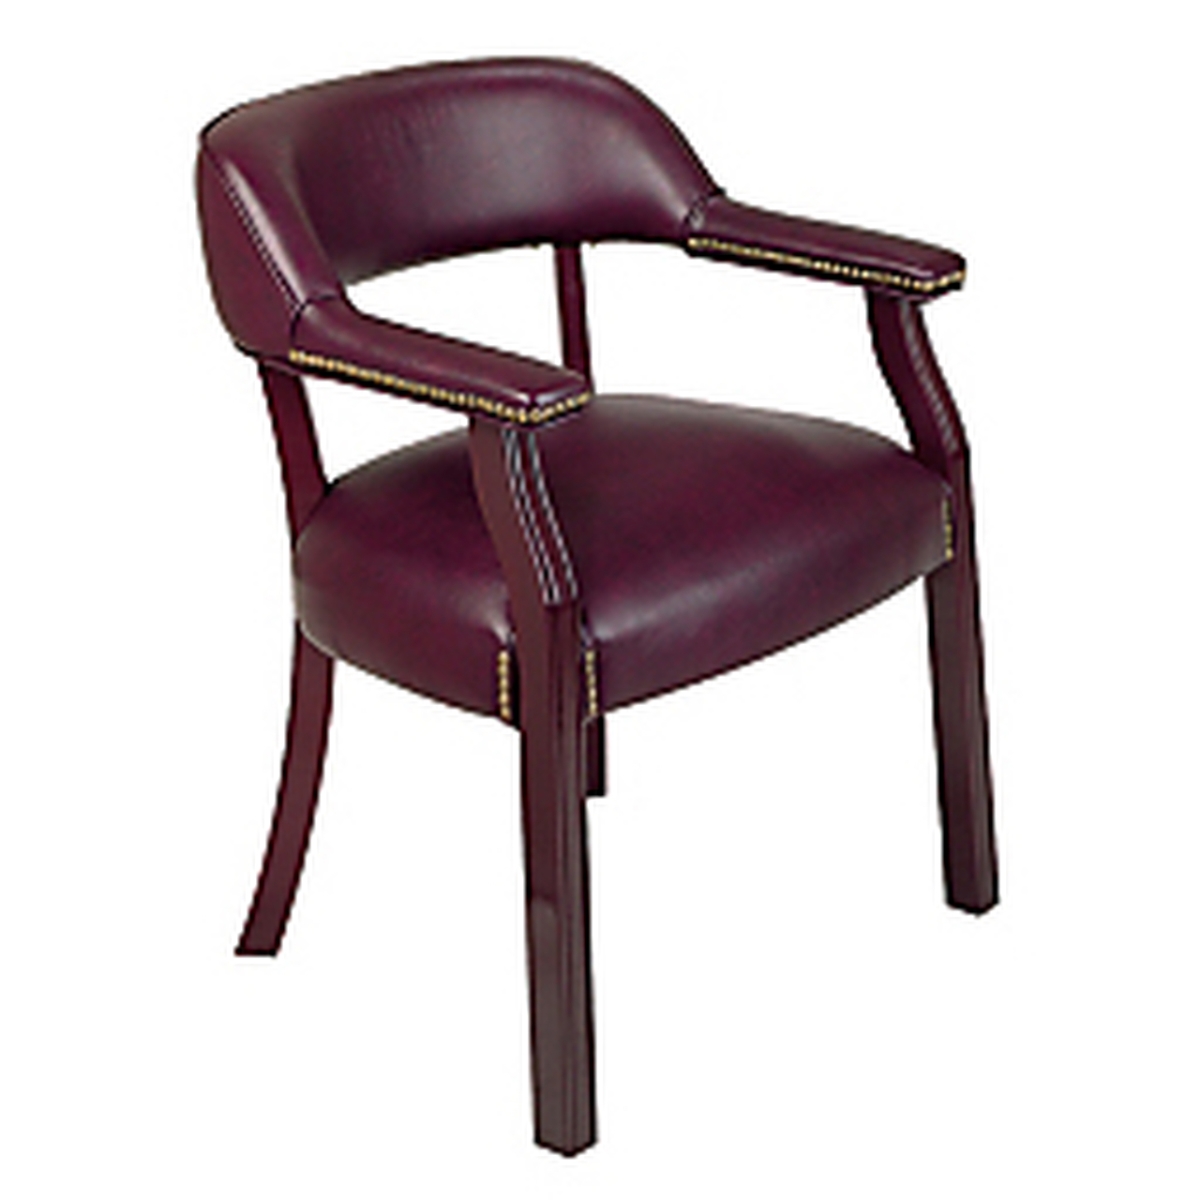 Picture of Officestar TV230-JT4 Traditional Guest Chair with Wrap Around Back